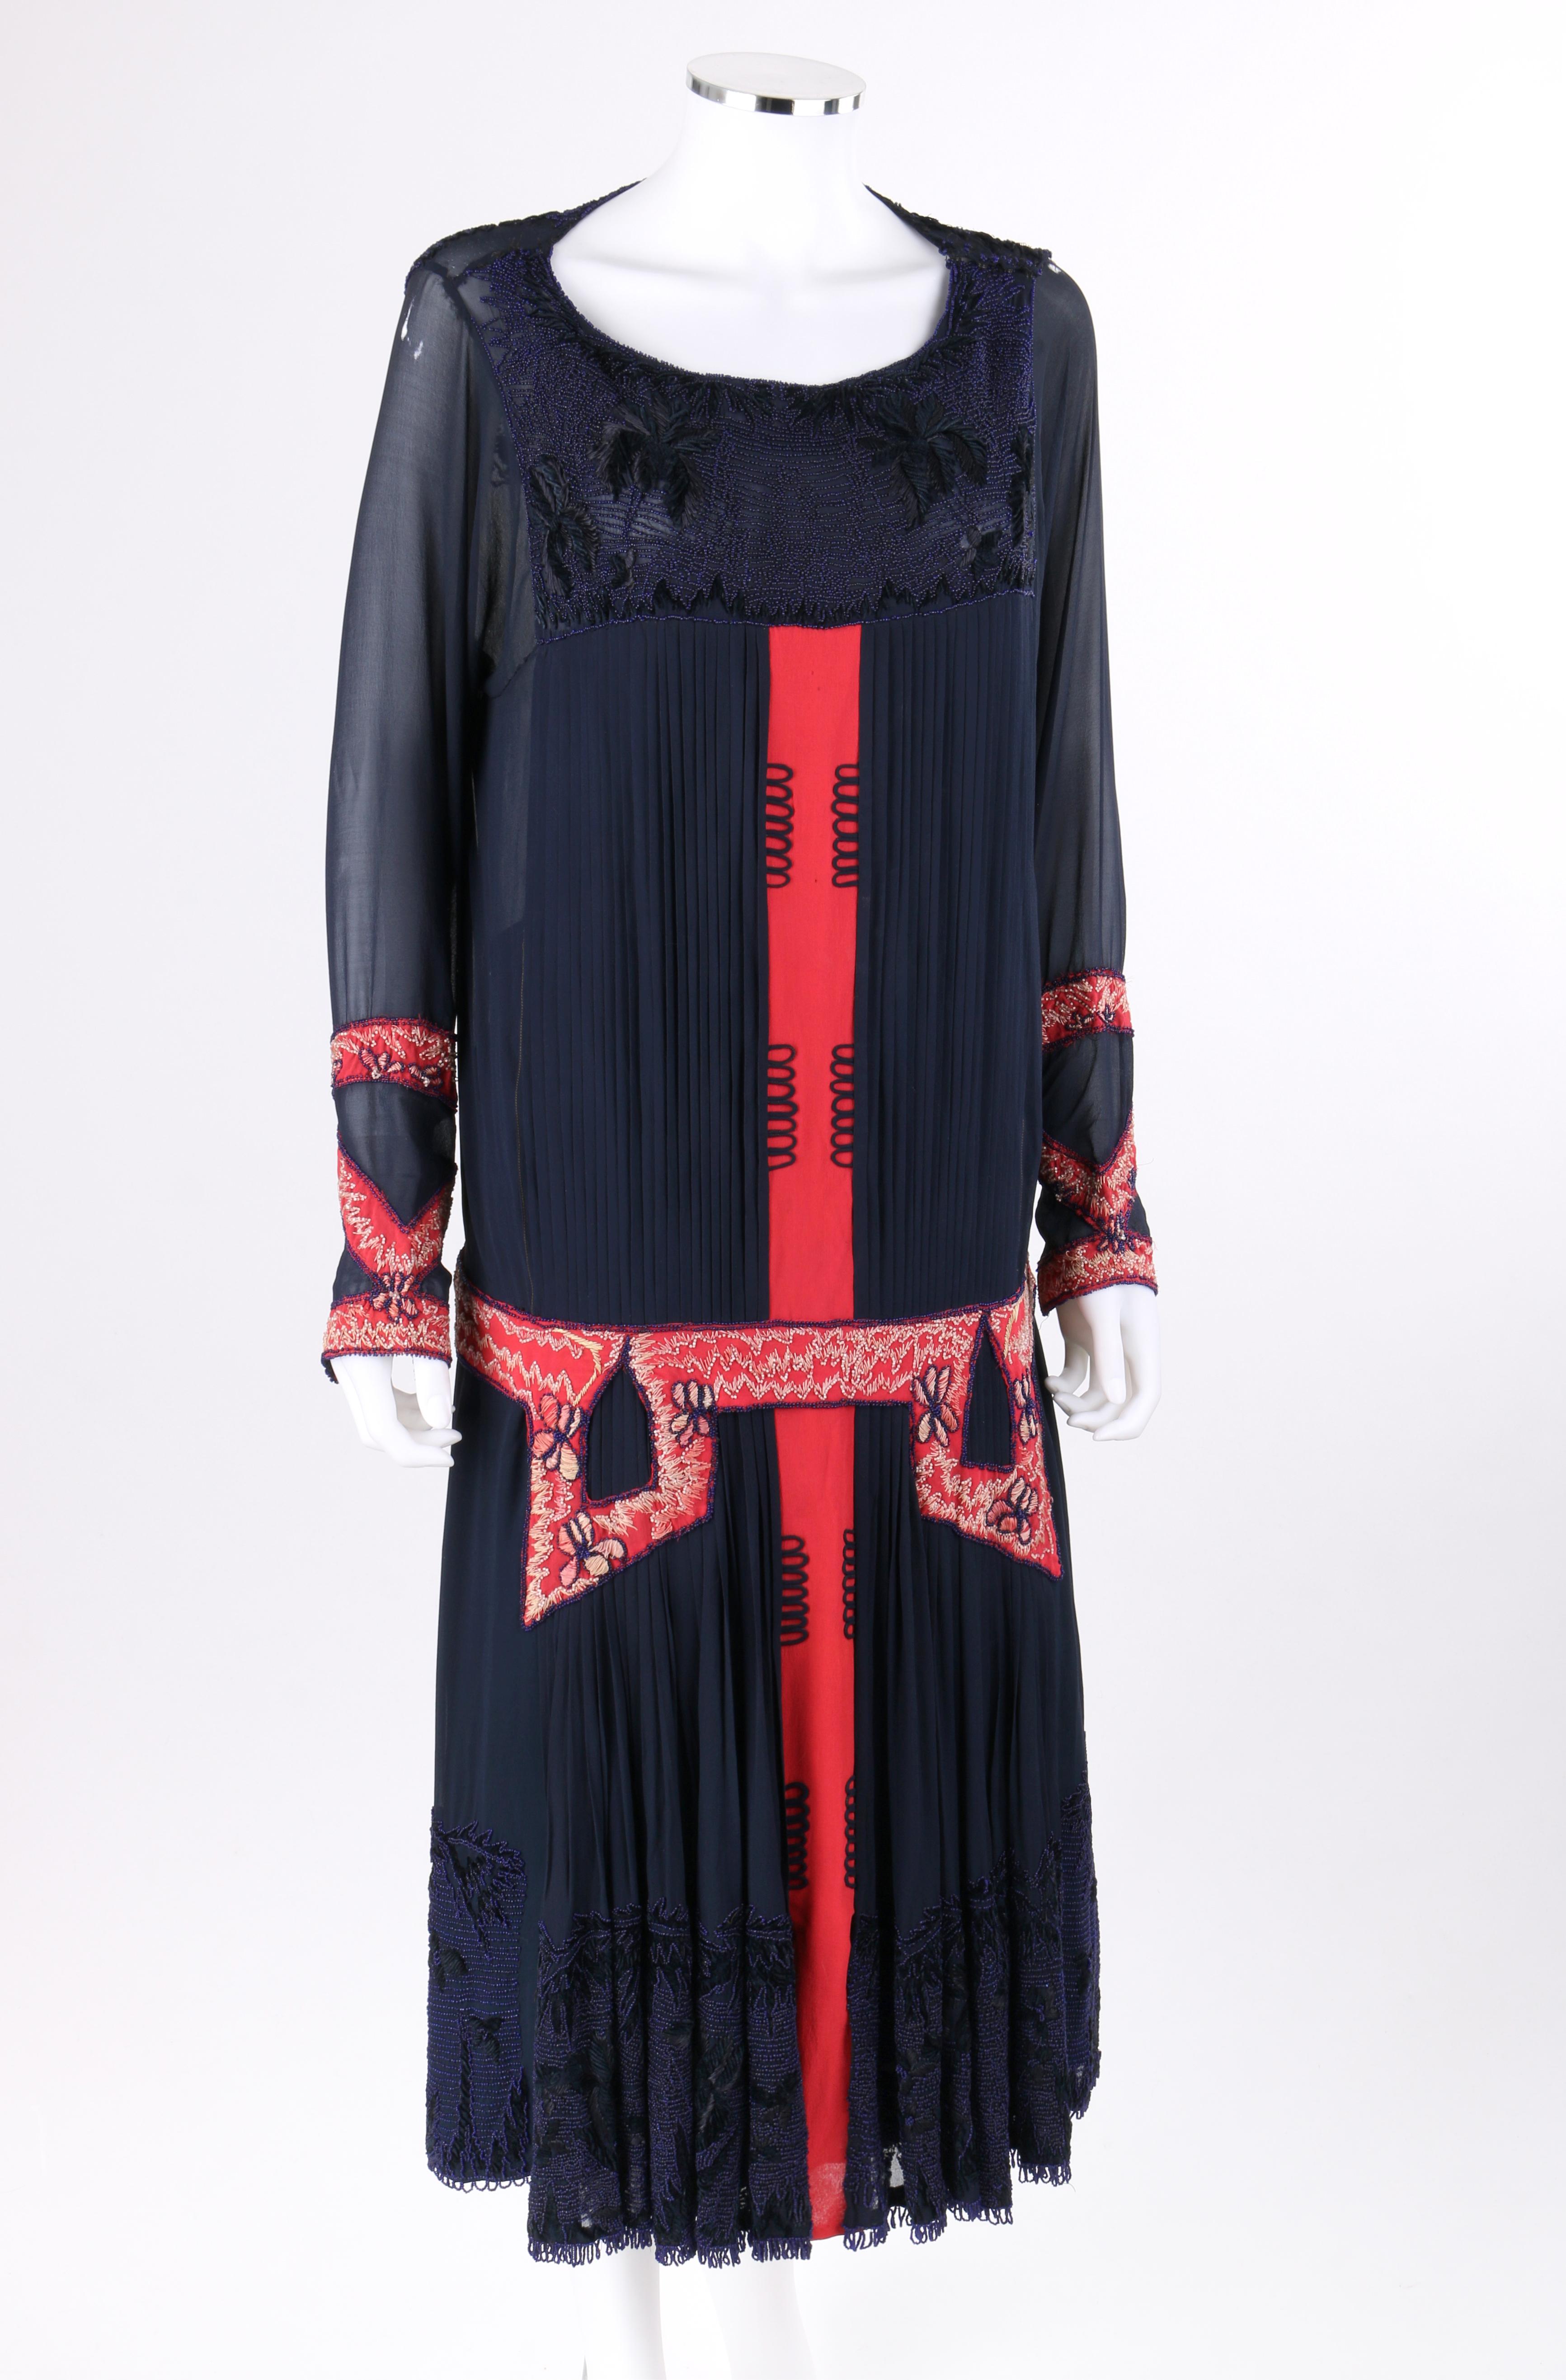 SADIE NEMSER c.1920’s Art Deco Silk Beaded Embroidered Cubist Flapper Couture Dress

Circa: 1920’s
Label(s): Nemser Original Model  
Style: Drop waist dress
Color(s): Shades of navy blue, dark pink and tan
Lined: Yes
Unmarked Fabric Content: Silk